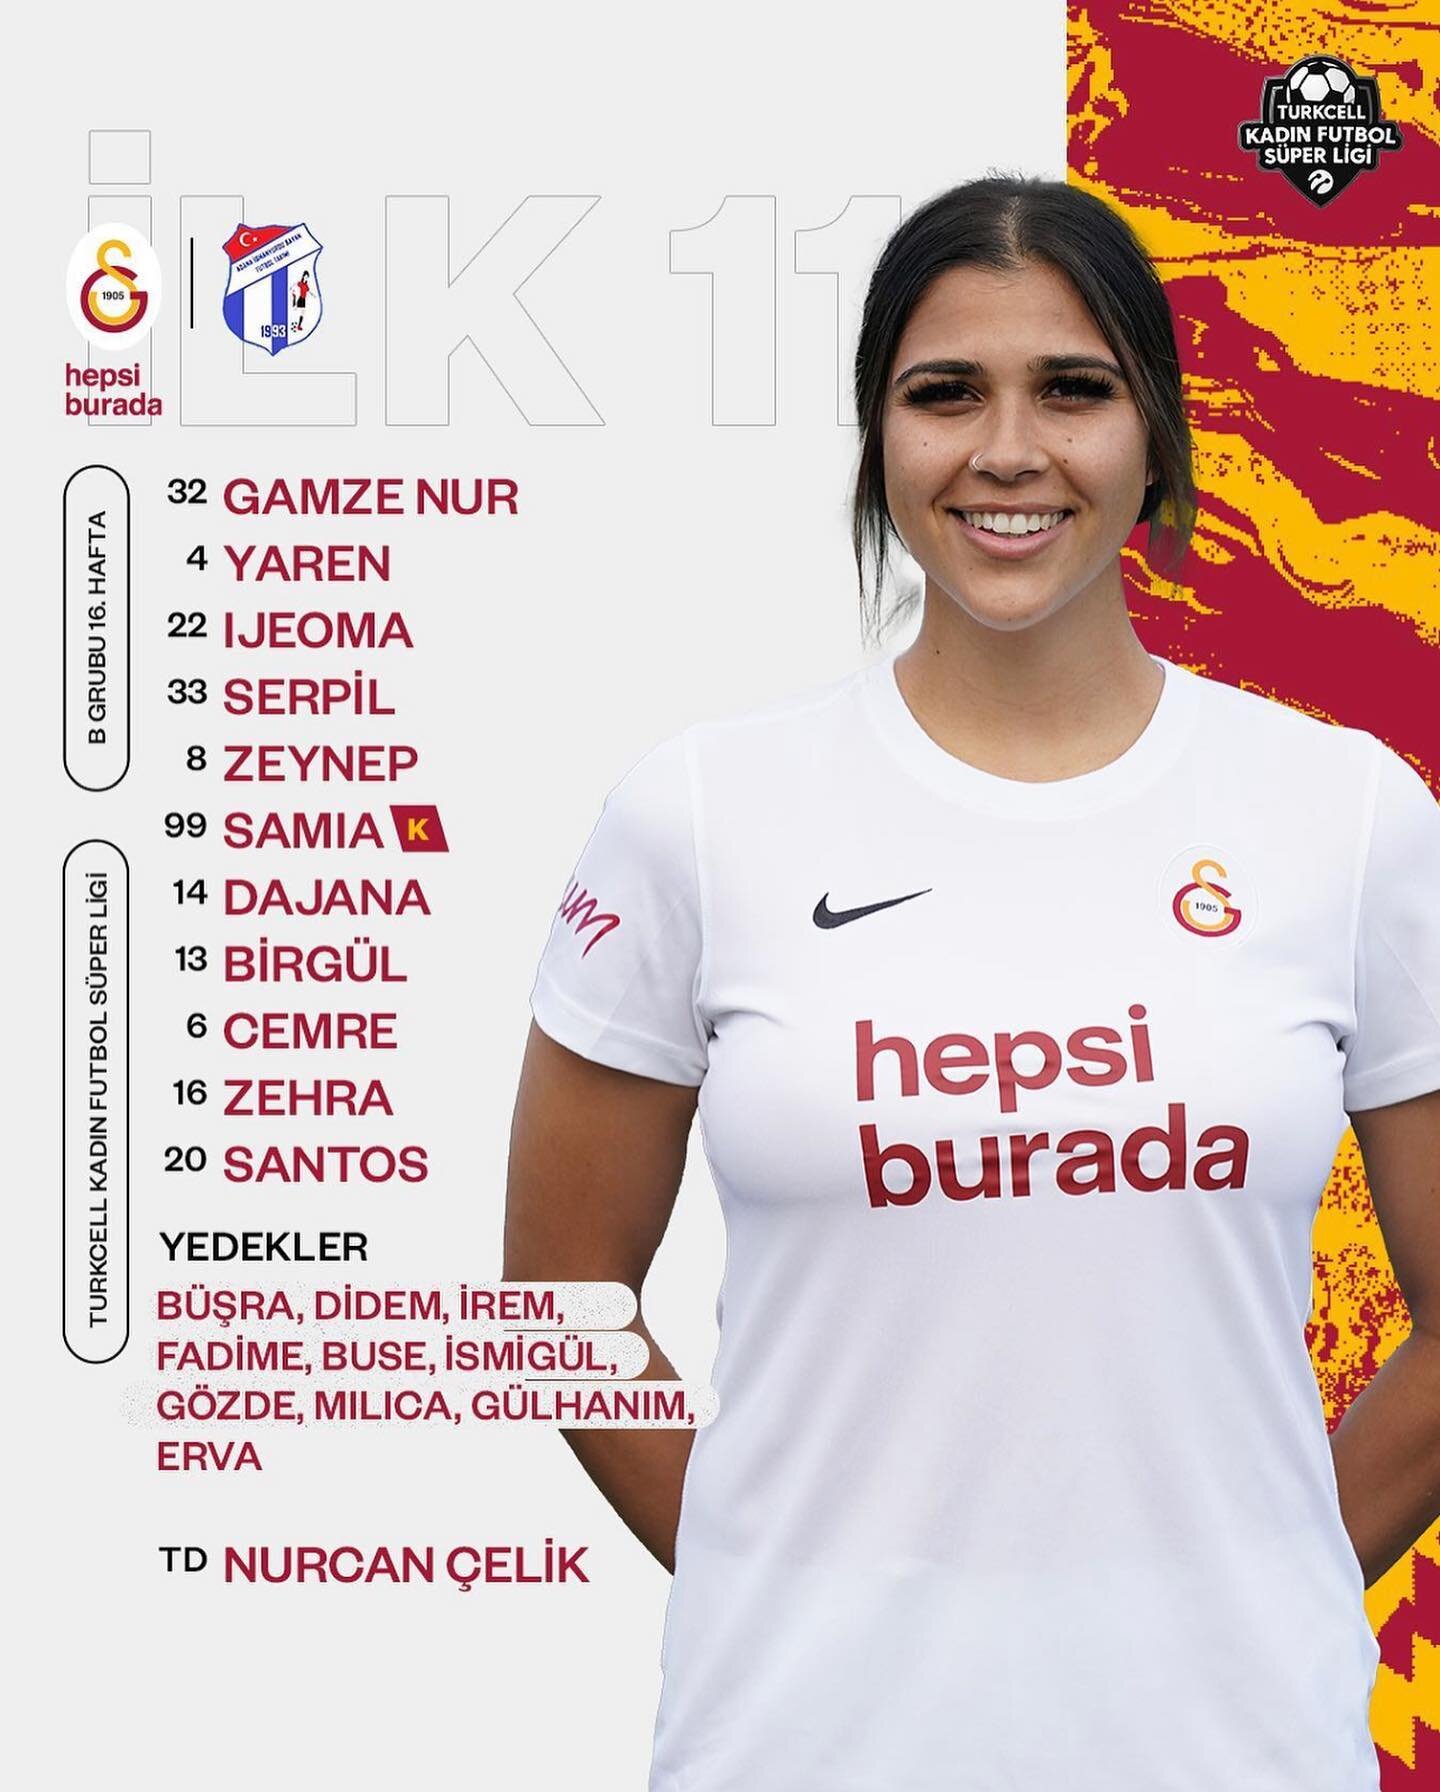 APT Player Spotlight: @saammiiaa
Professional Footballer:
- Galatasaray 🇹🇷 @kadinfutbolgs 
- Egypt FA 🇪🇬 @femalepharaohs

Samia came to me 2 weeks after knee surgery and told me she has 3 weeks to train for a trial in Turkey. She hadn&rsquo;t tol